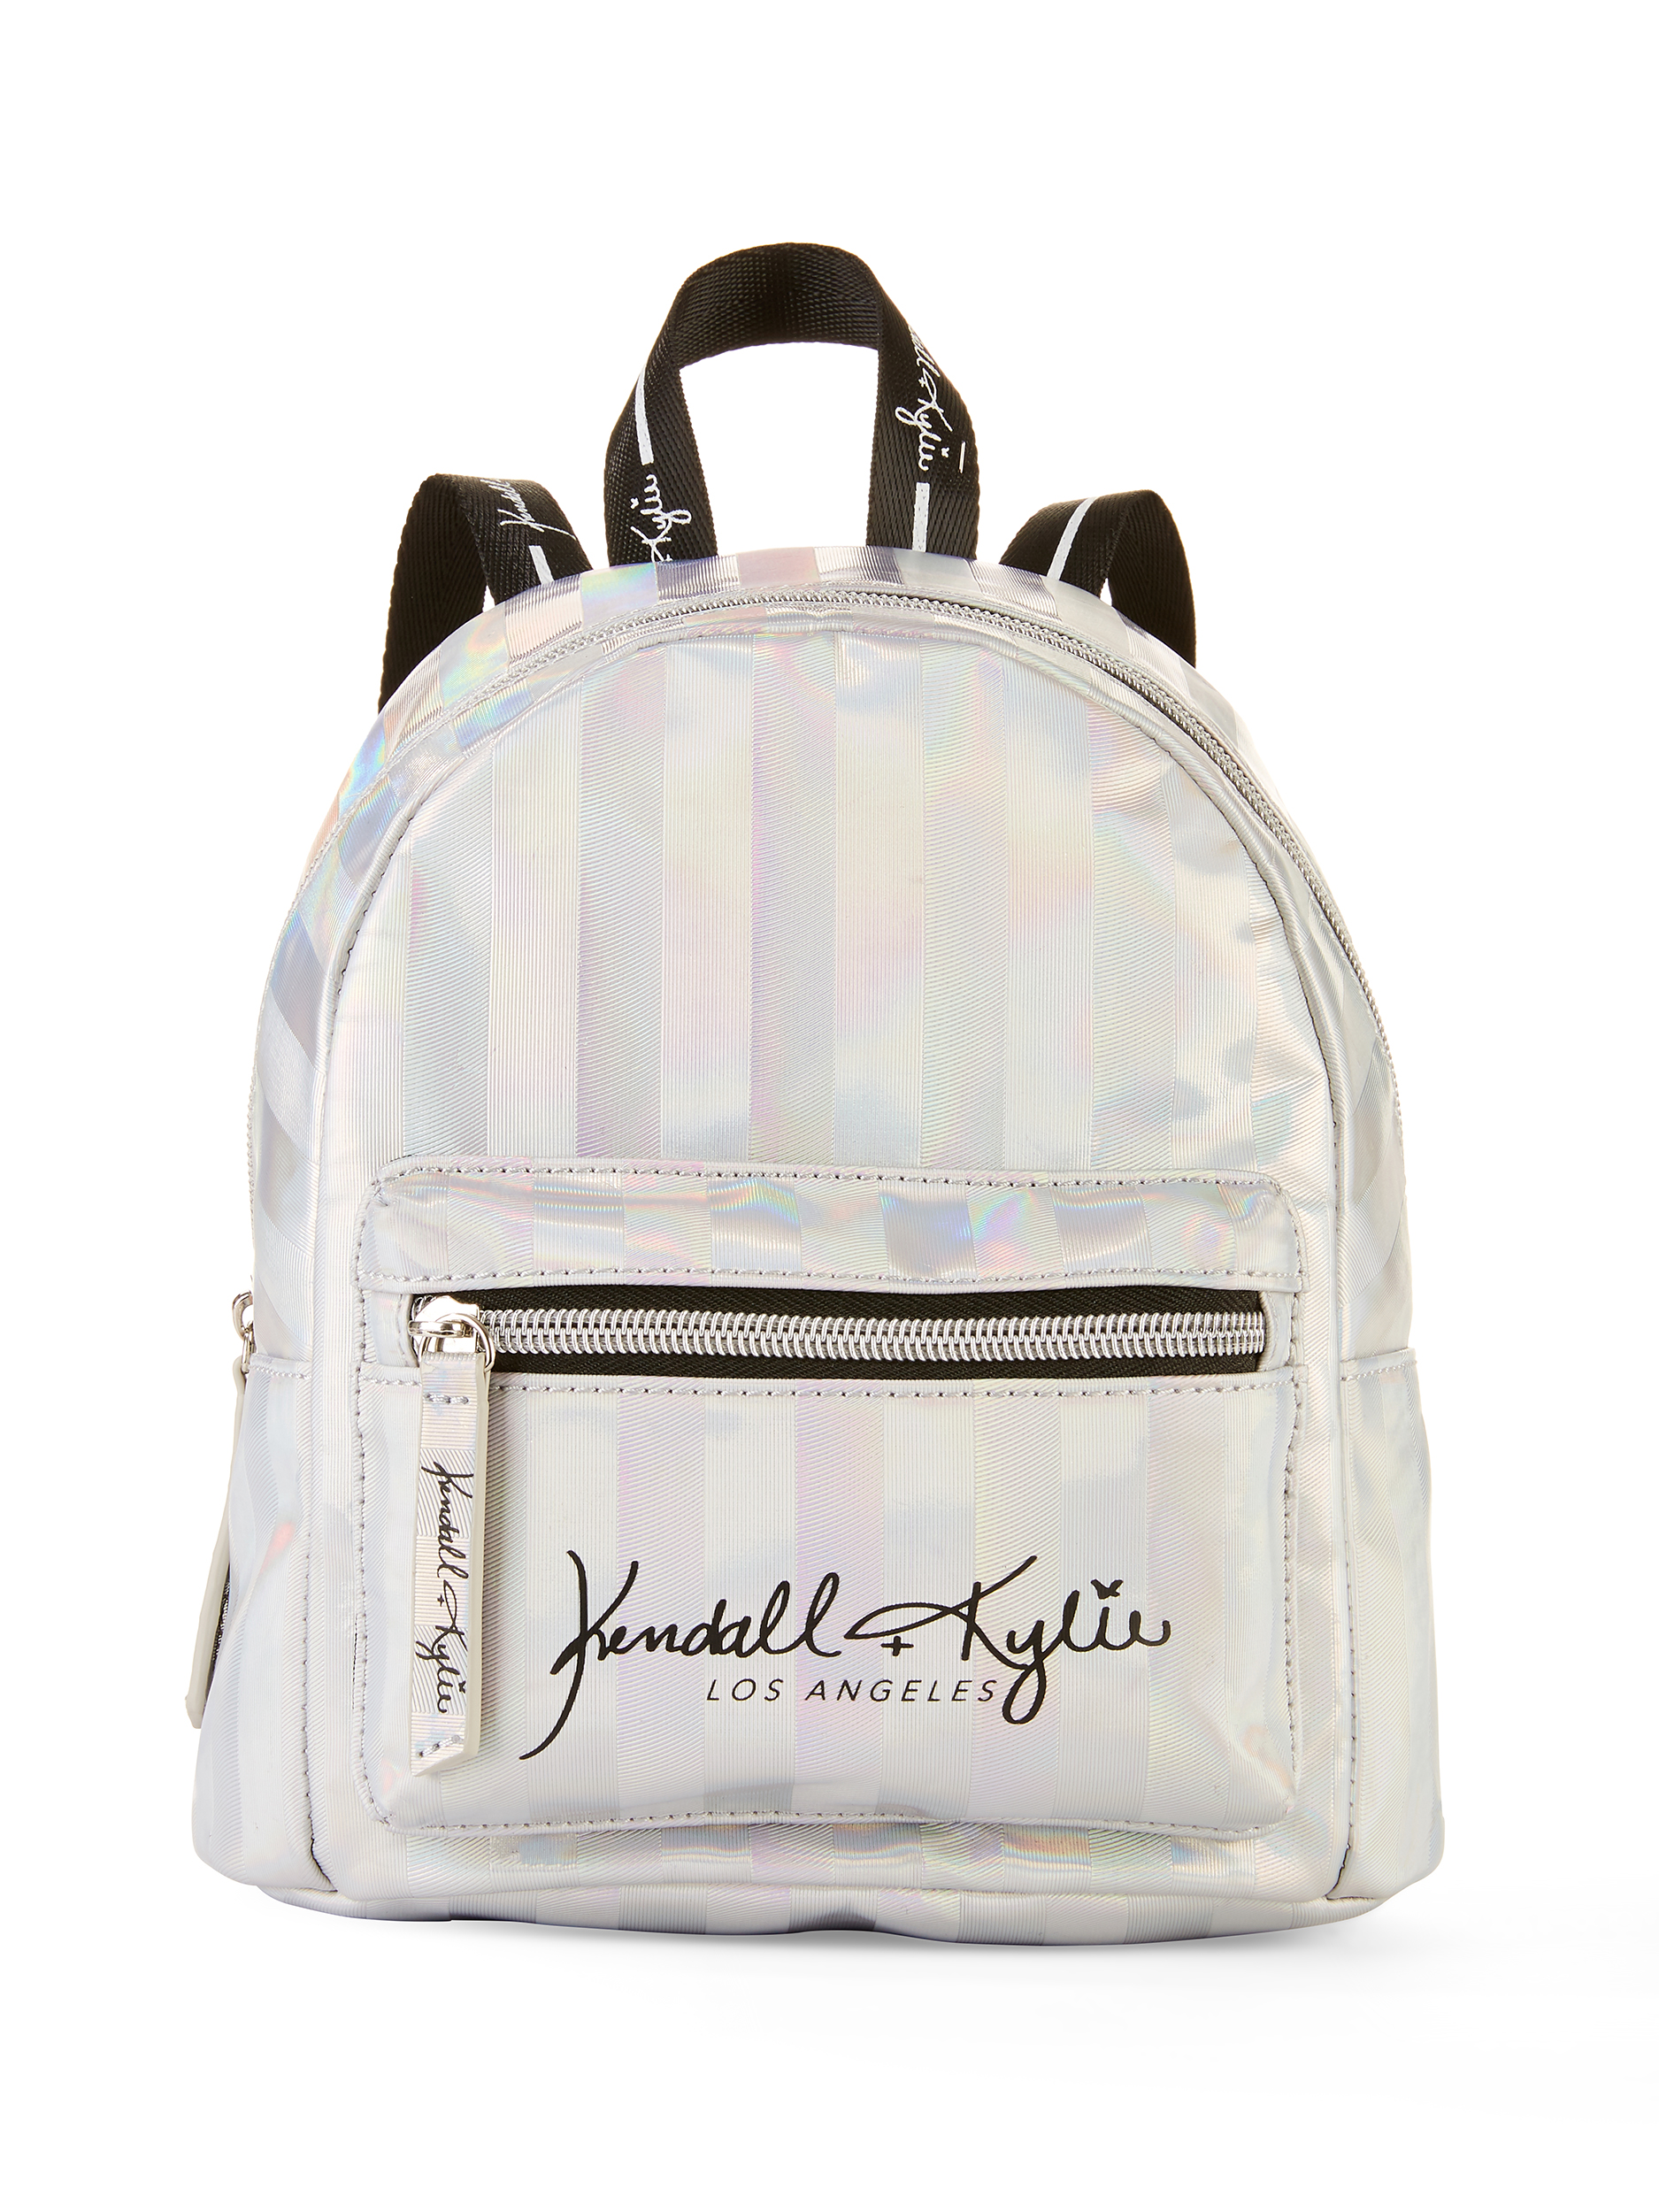 Kendall + Kylie for Walmart Iridescent Mini Backpack - image 1 of 5